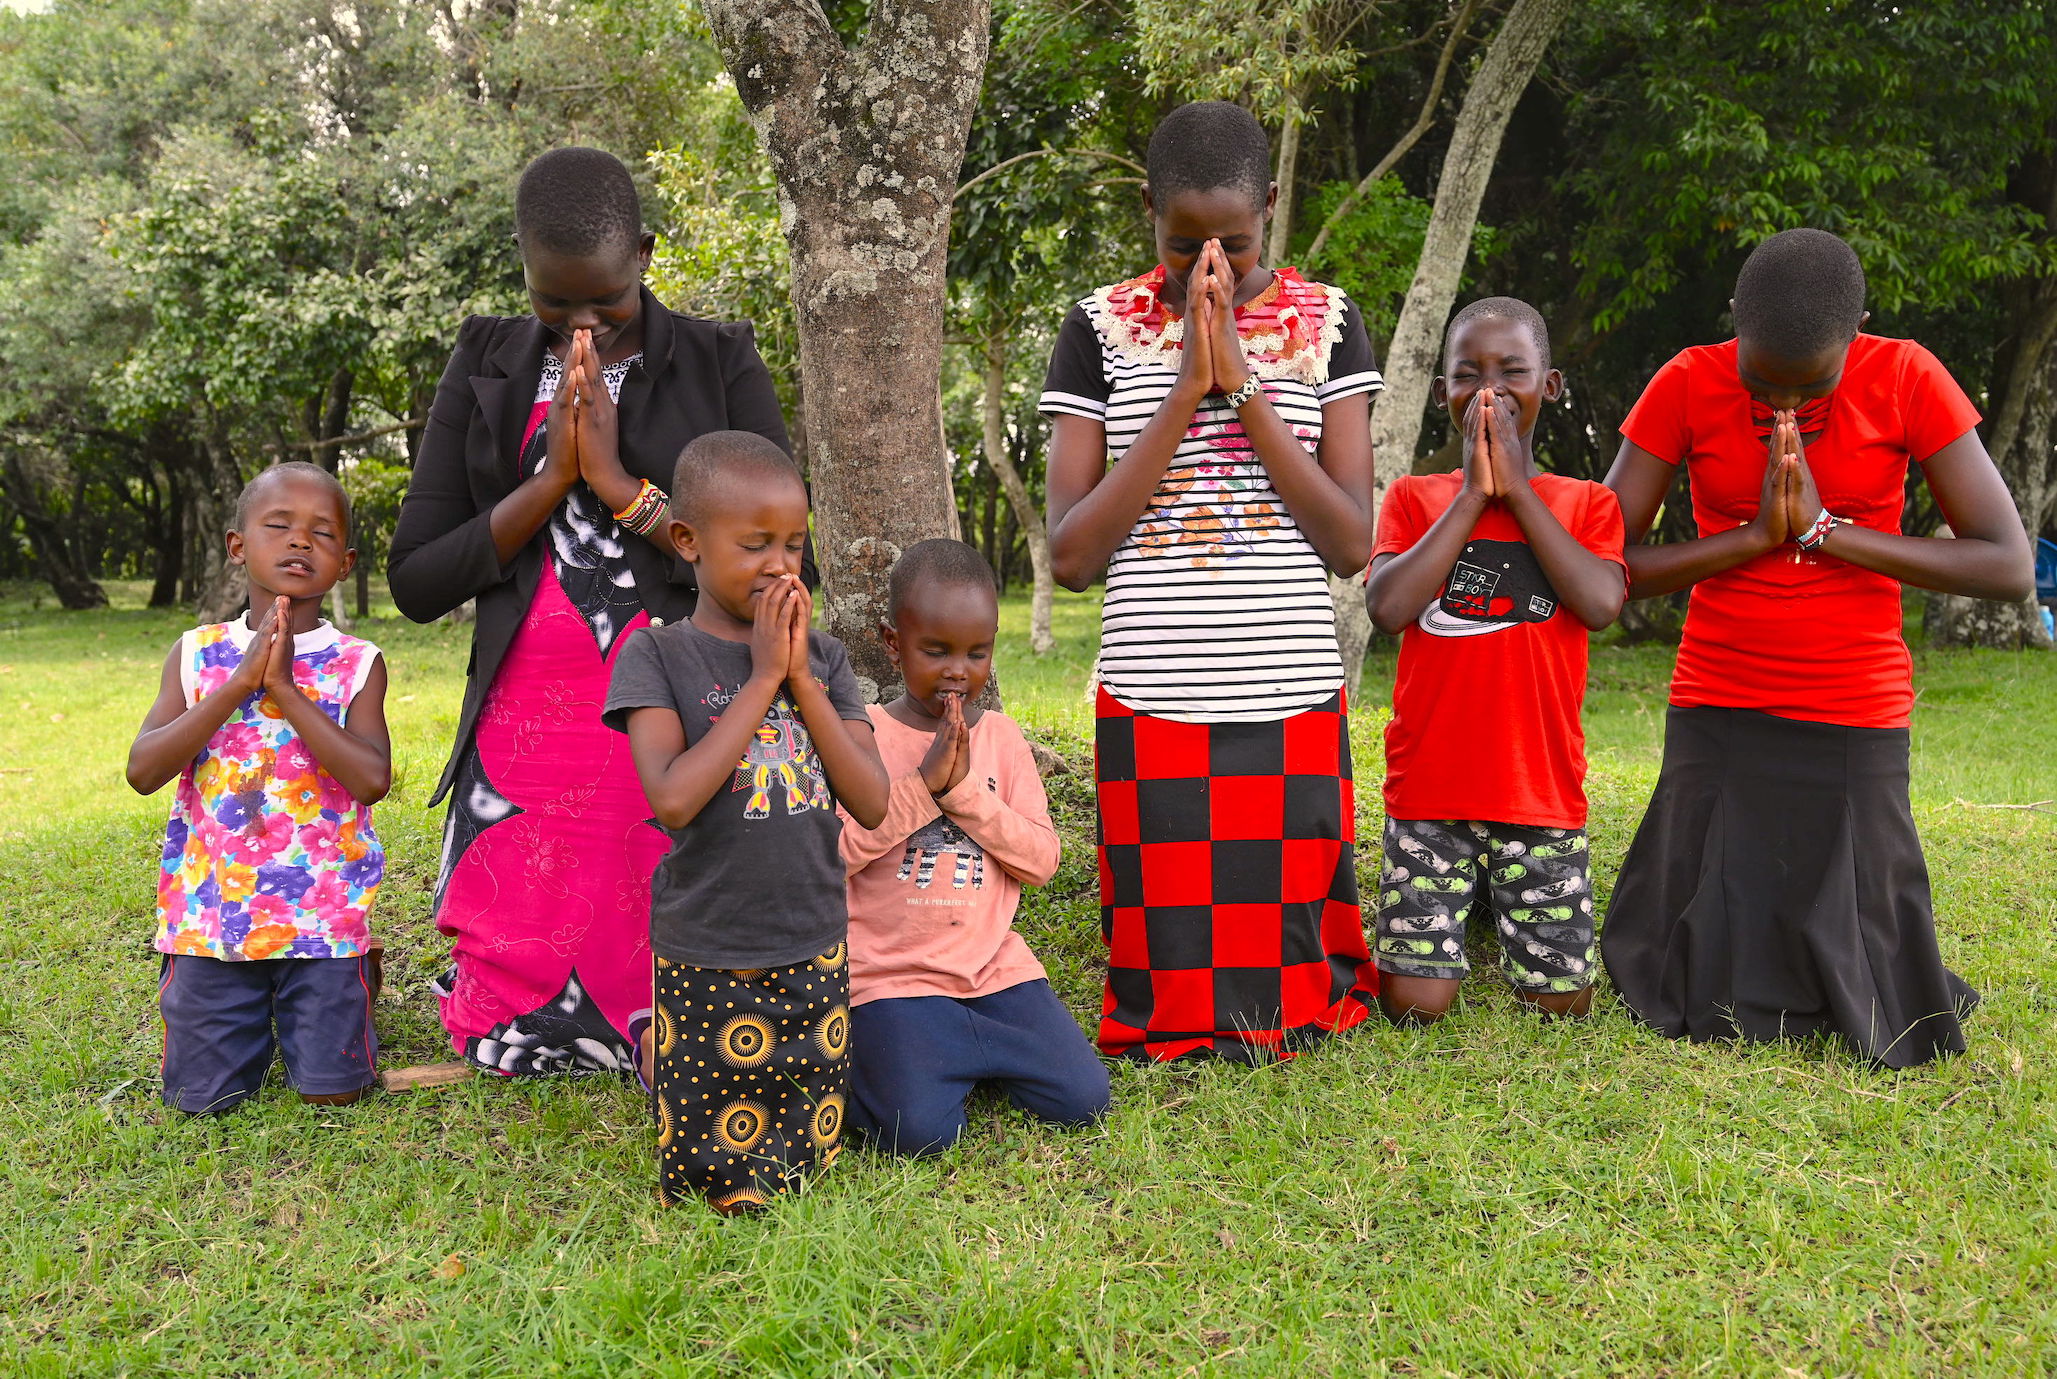 Leah and other children in her community praying to God to protect them from harm and enable the community to end all forms of violence against children.